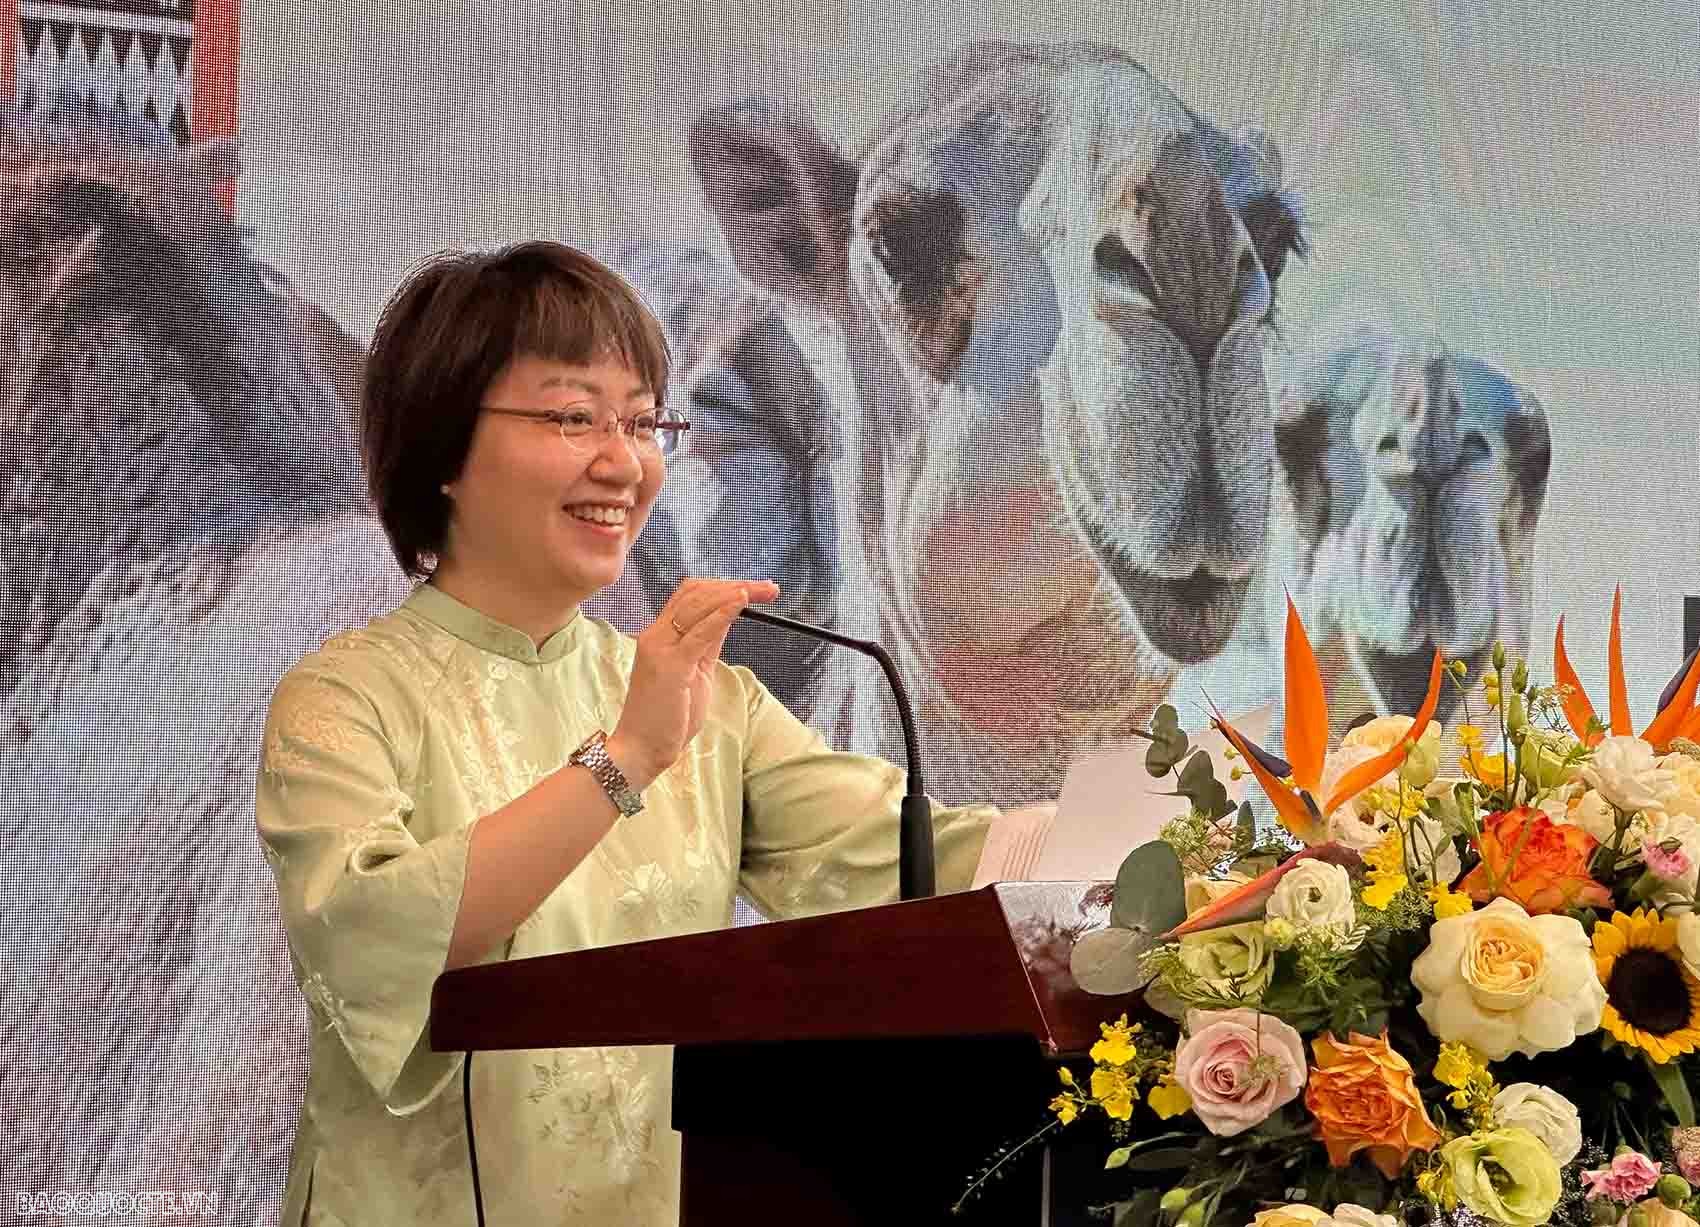 World Camel Day observed in Vietnam for first time: Celebration of Int'l Year of Camelids in Hanoi